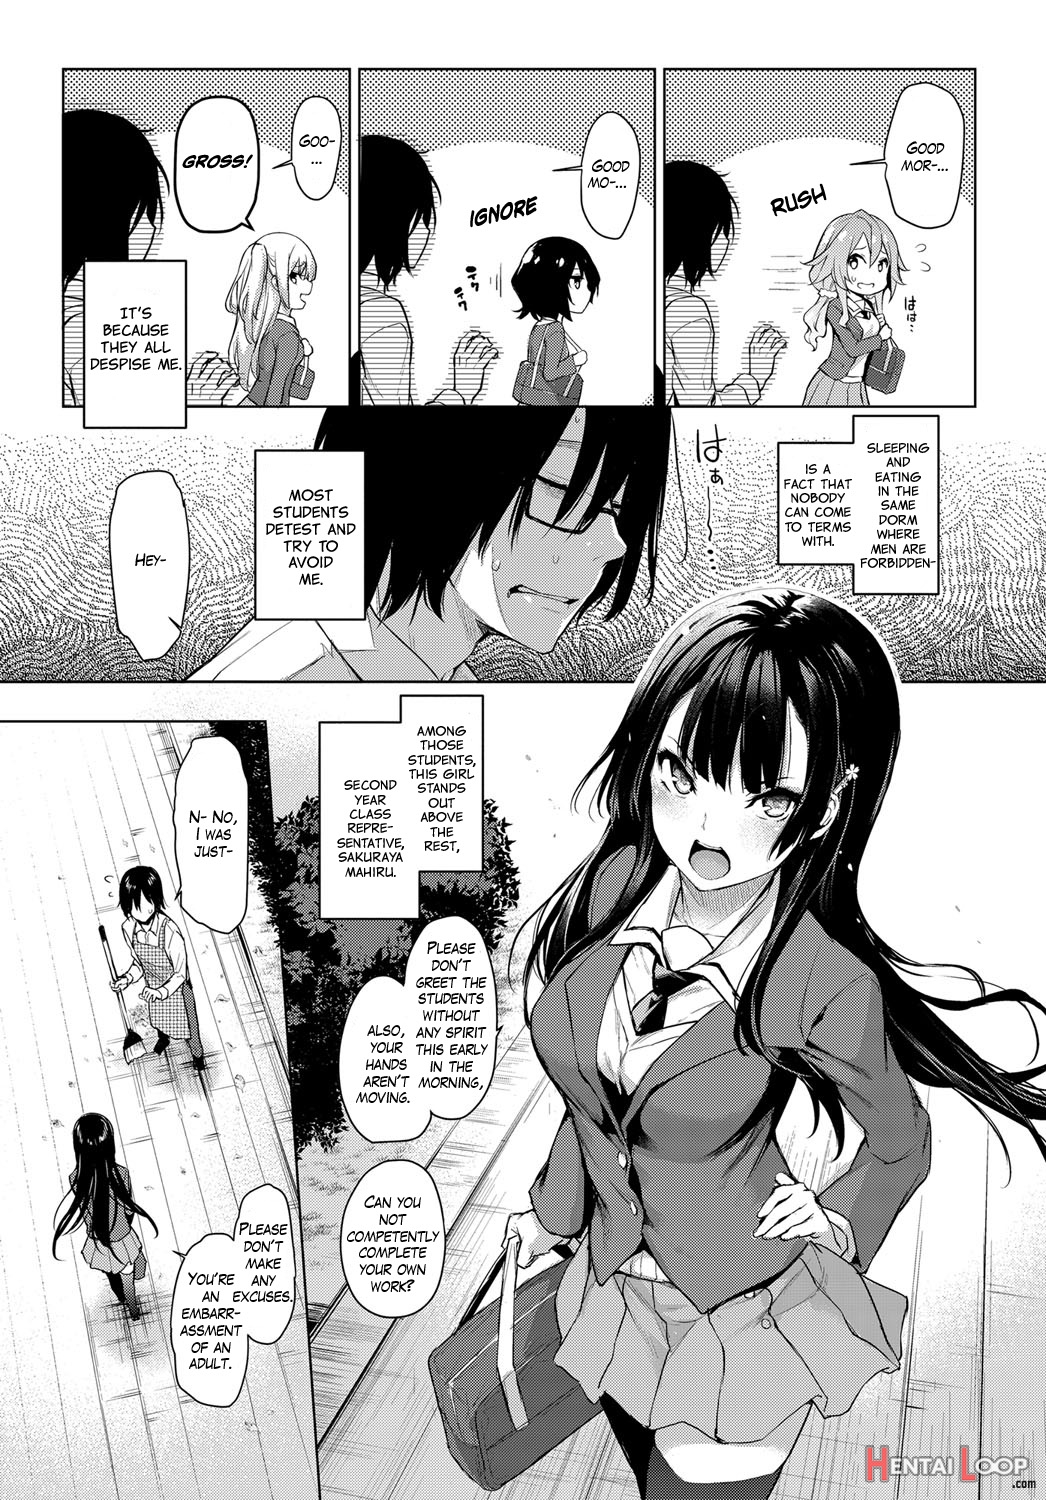 Older Sister Experience - The Girls' Dormitory page 3